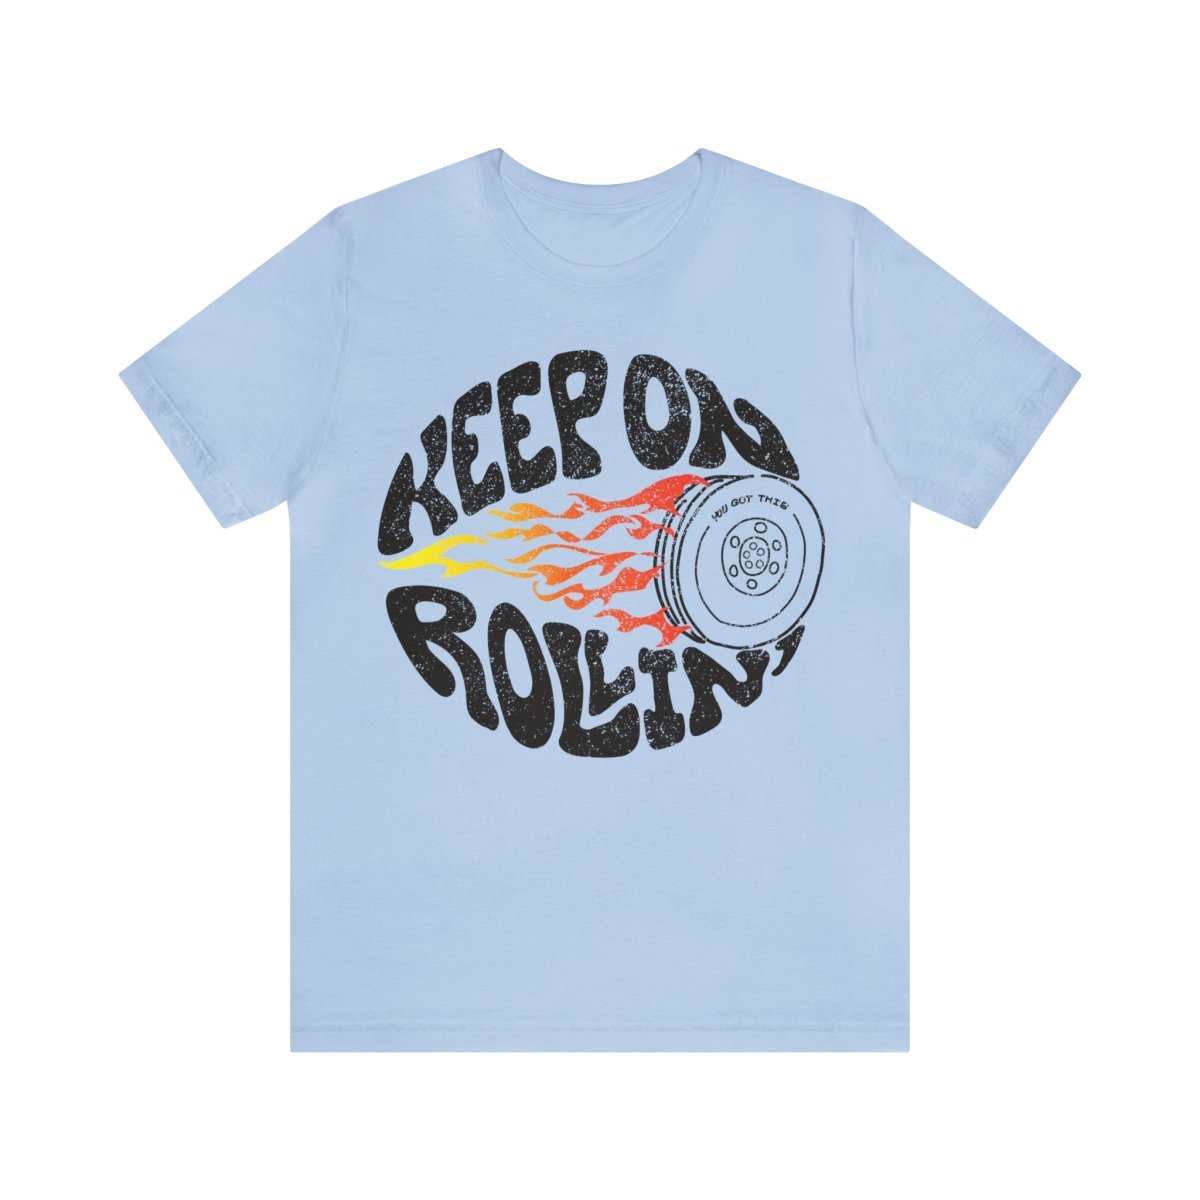 Keep On Rollin Premium T-Shirt, You Got This, Hope or Change Gift